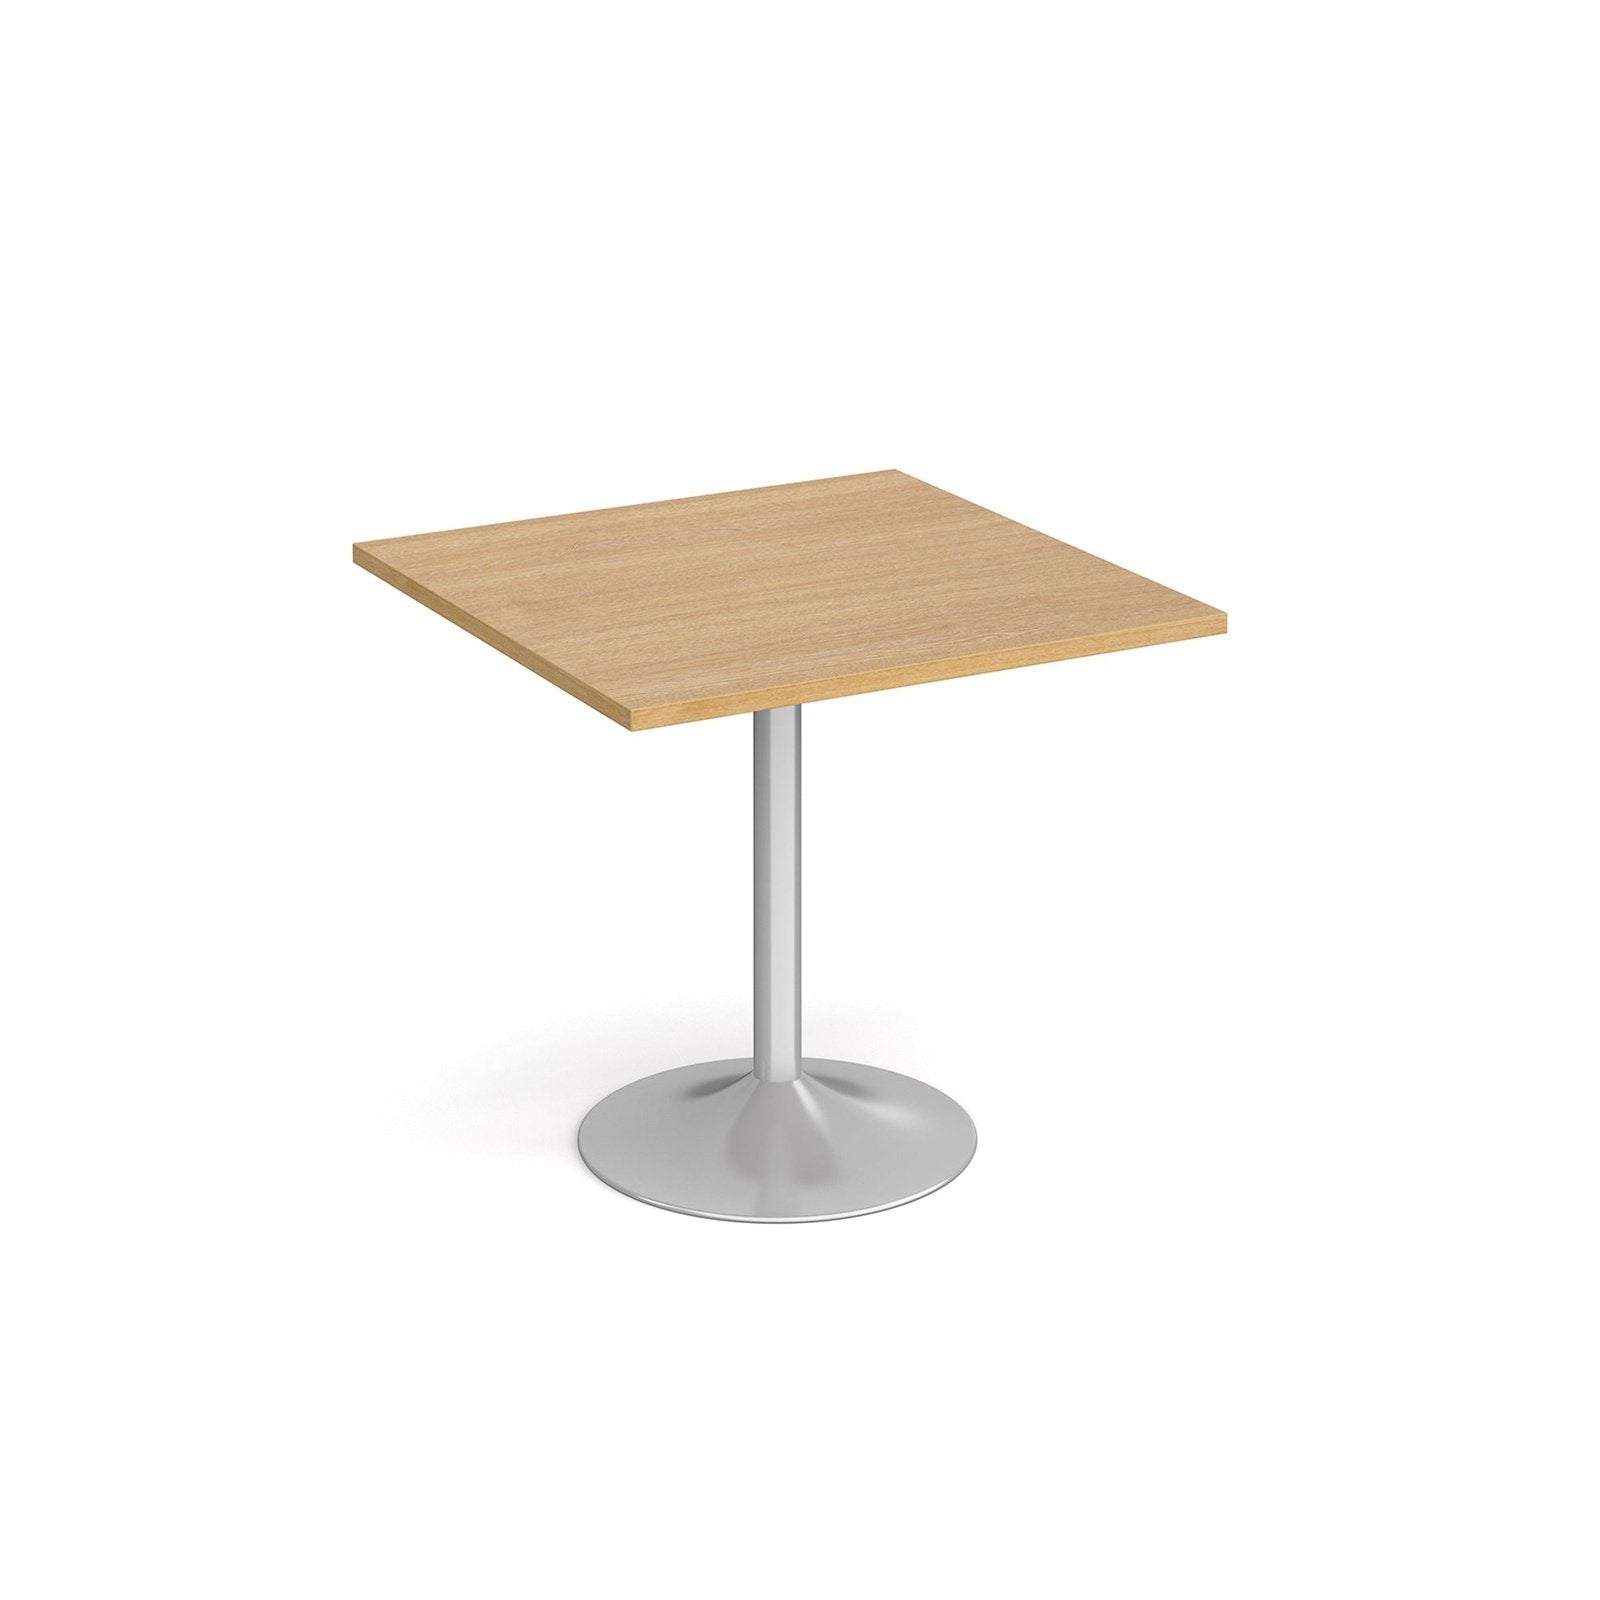 Genoa square dining table with trumpet base - Office Products Online